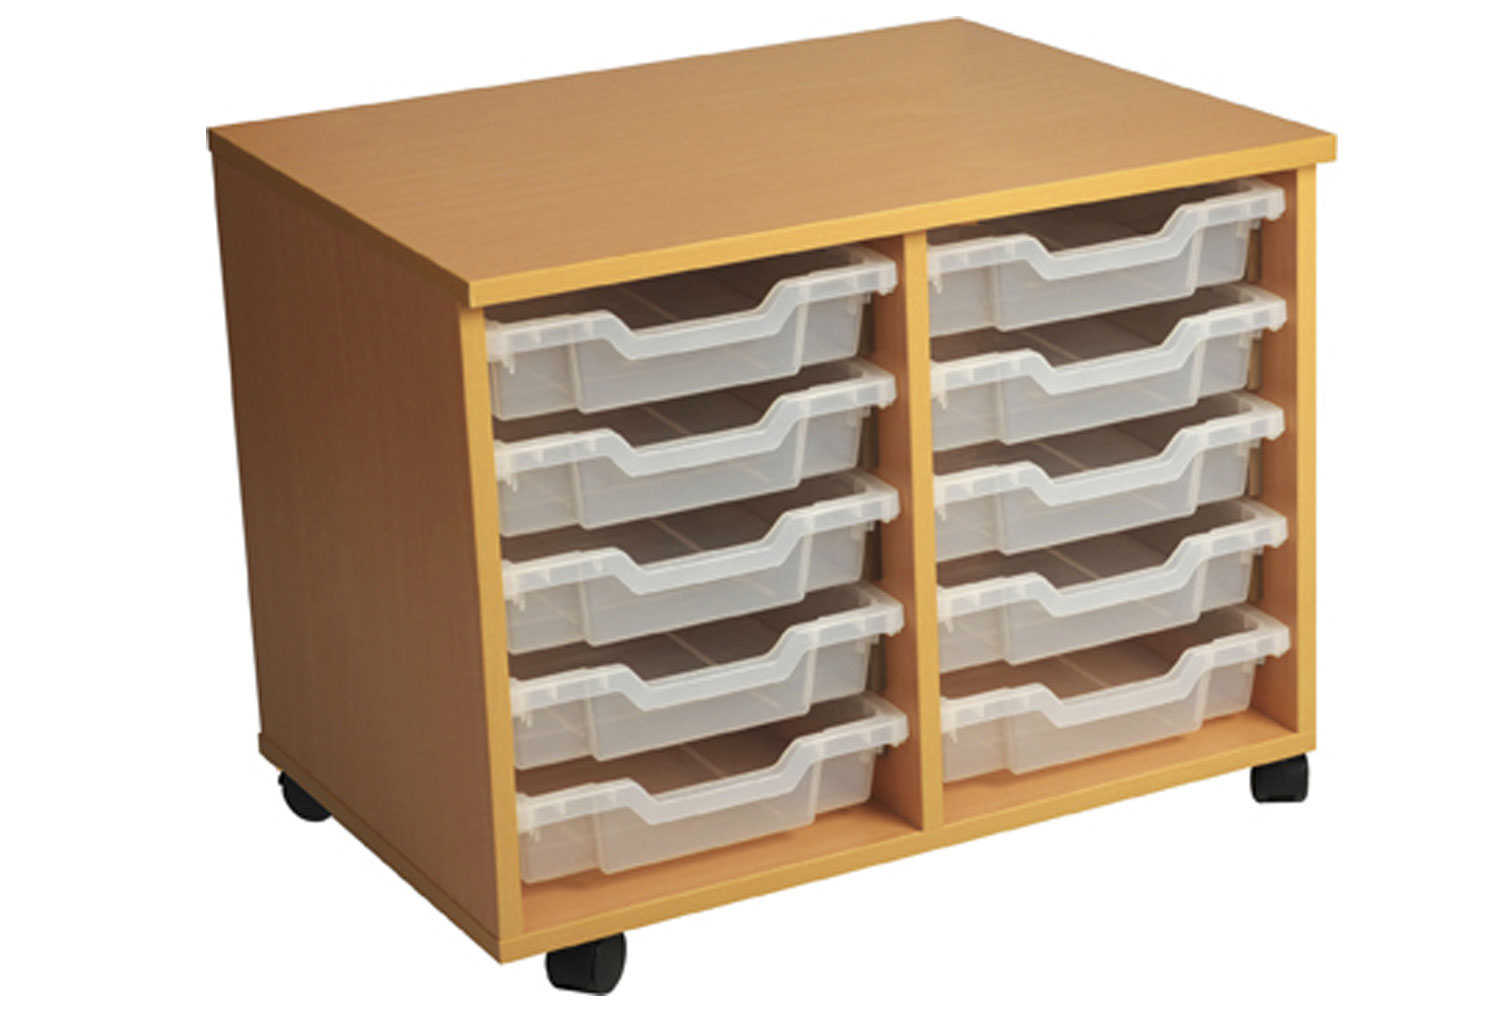 Primary Double Column Mobile Tray Storage Unit With 10 Shallow Trays